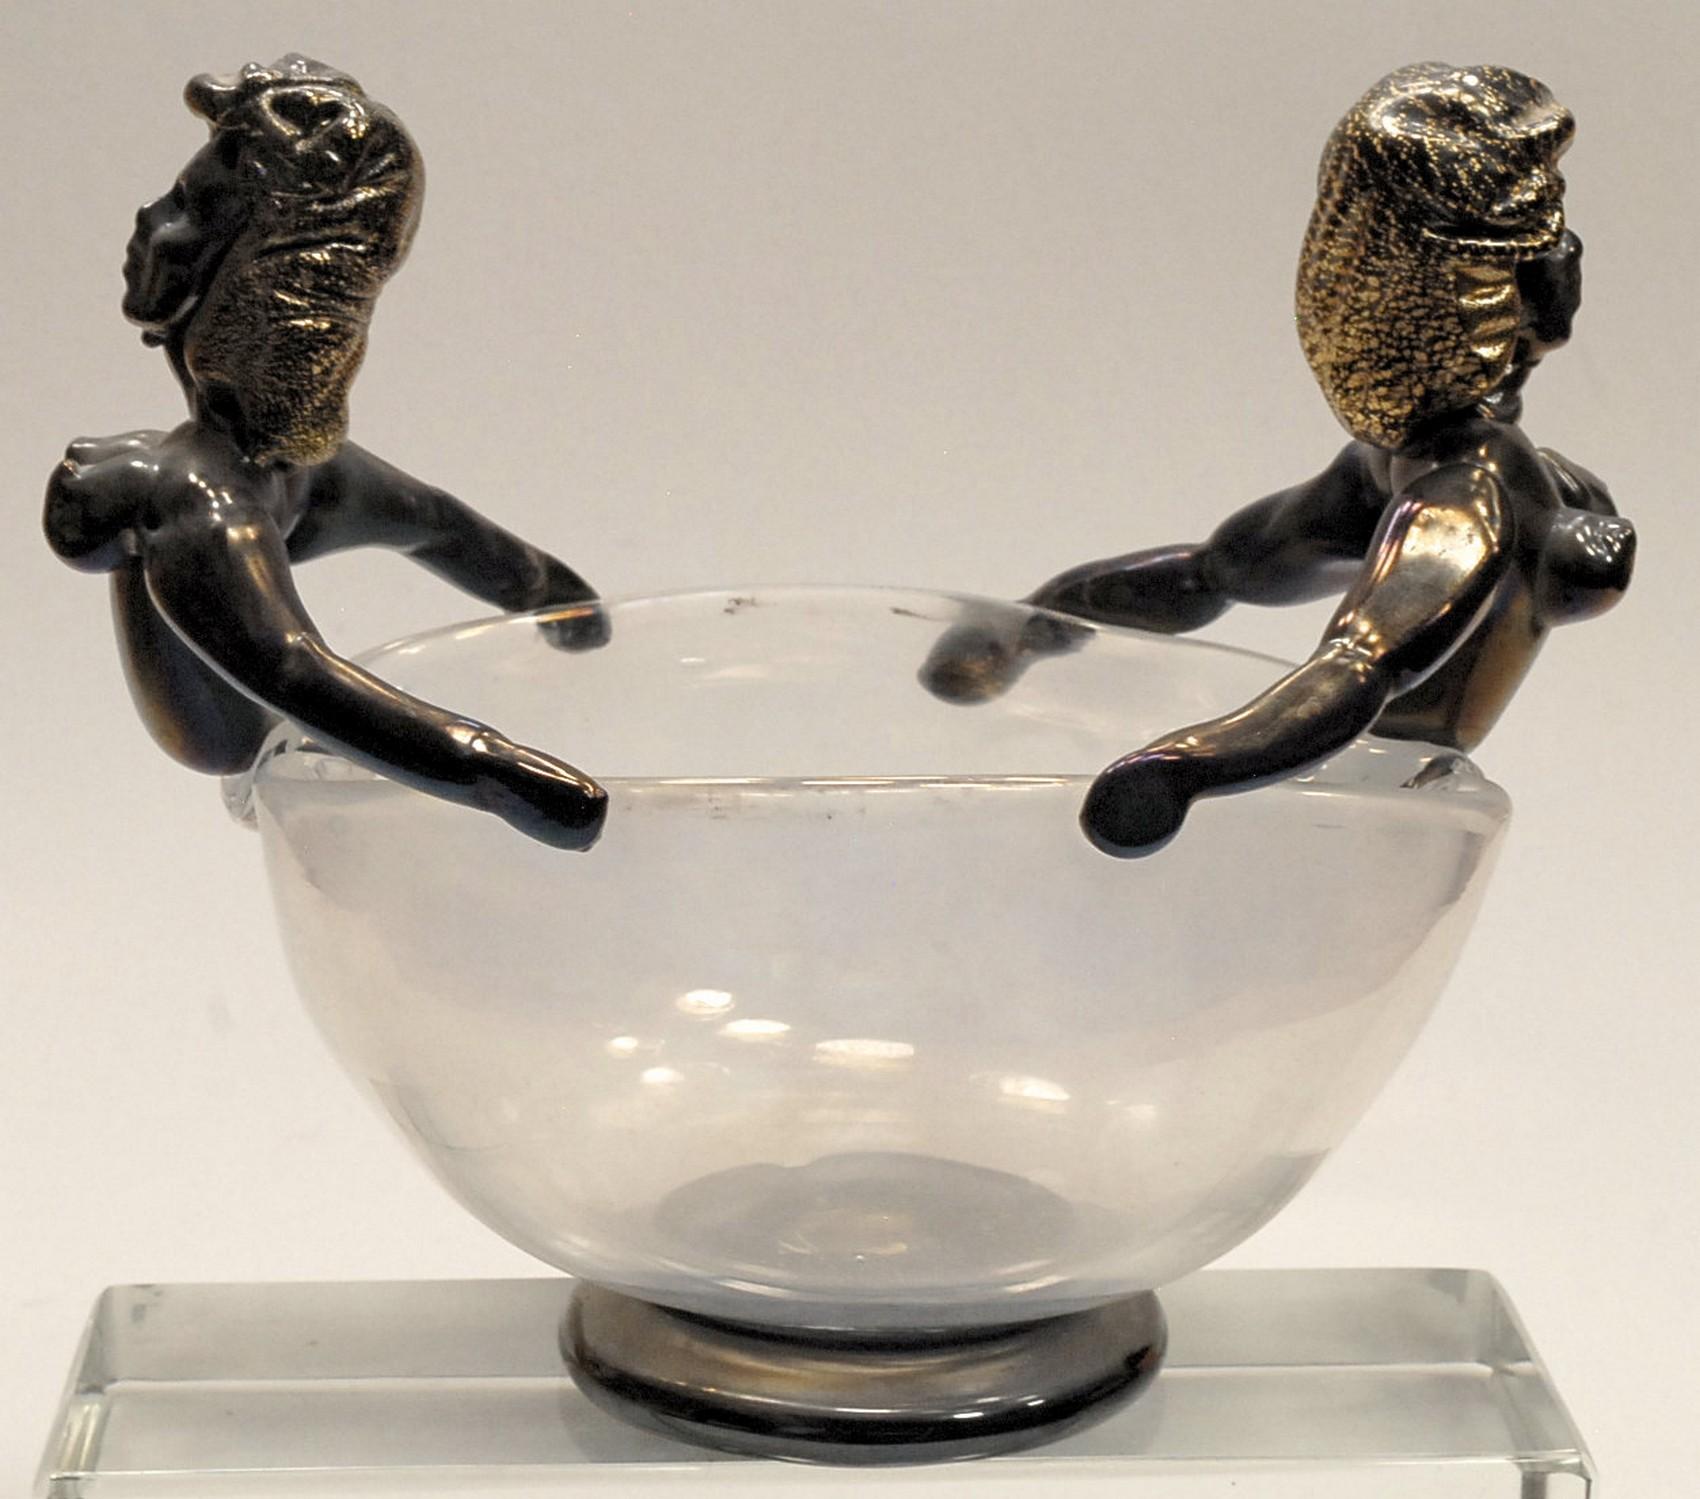 Iridescent Bowl with figurine in Figurehead Position, Ercole Barovier, 1930 For Sale 4